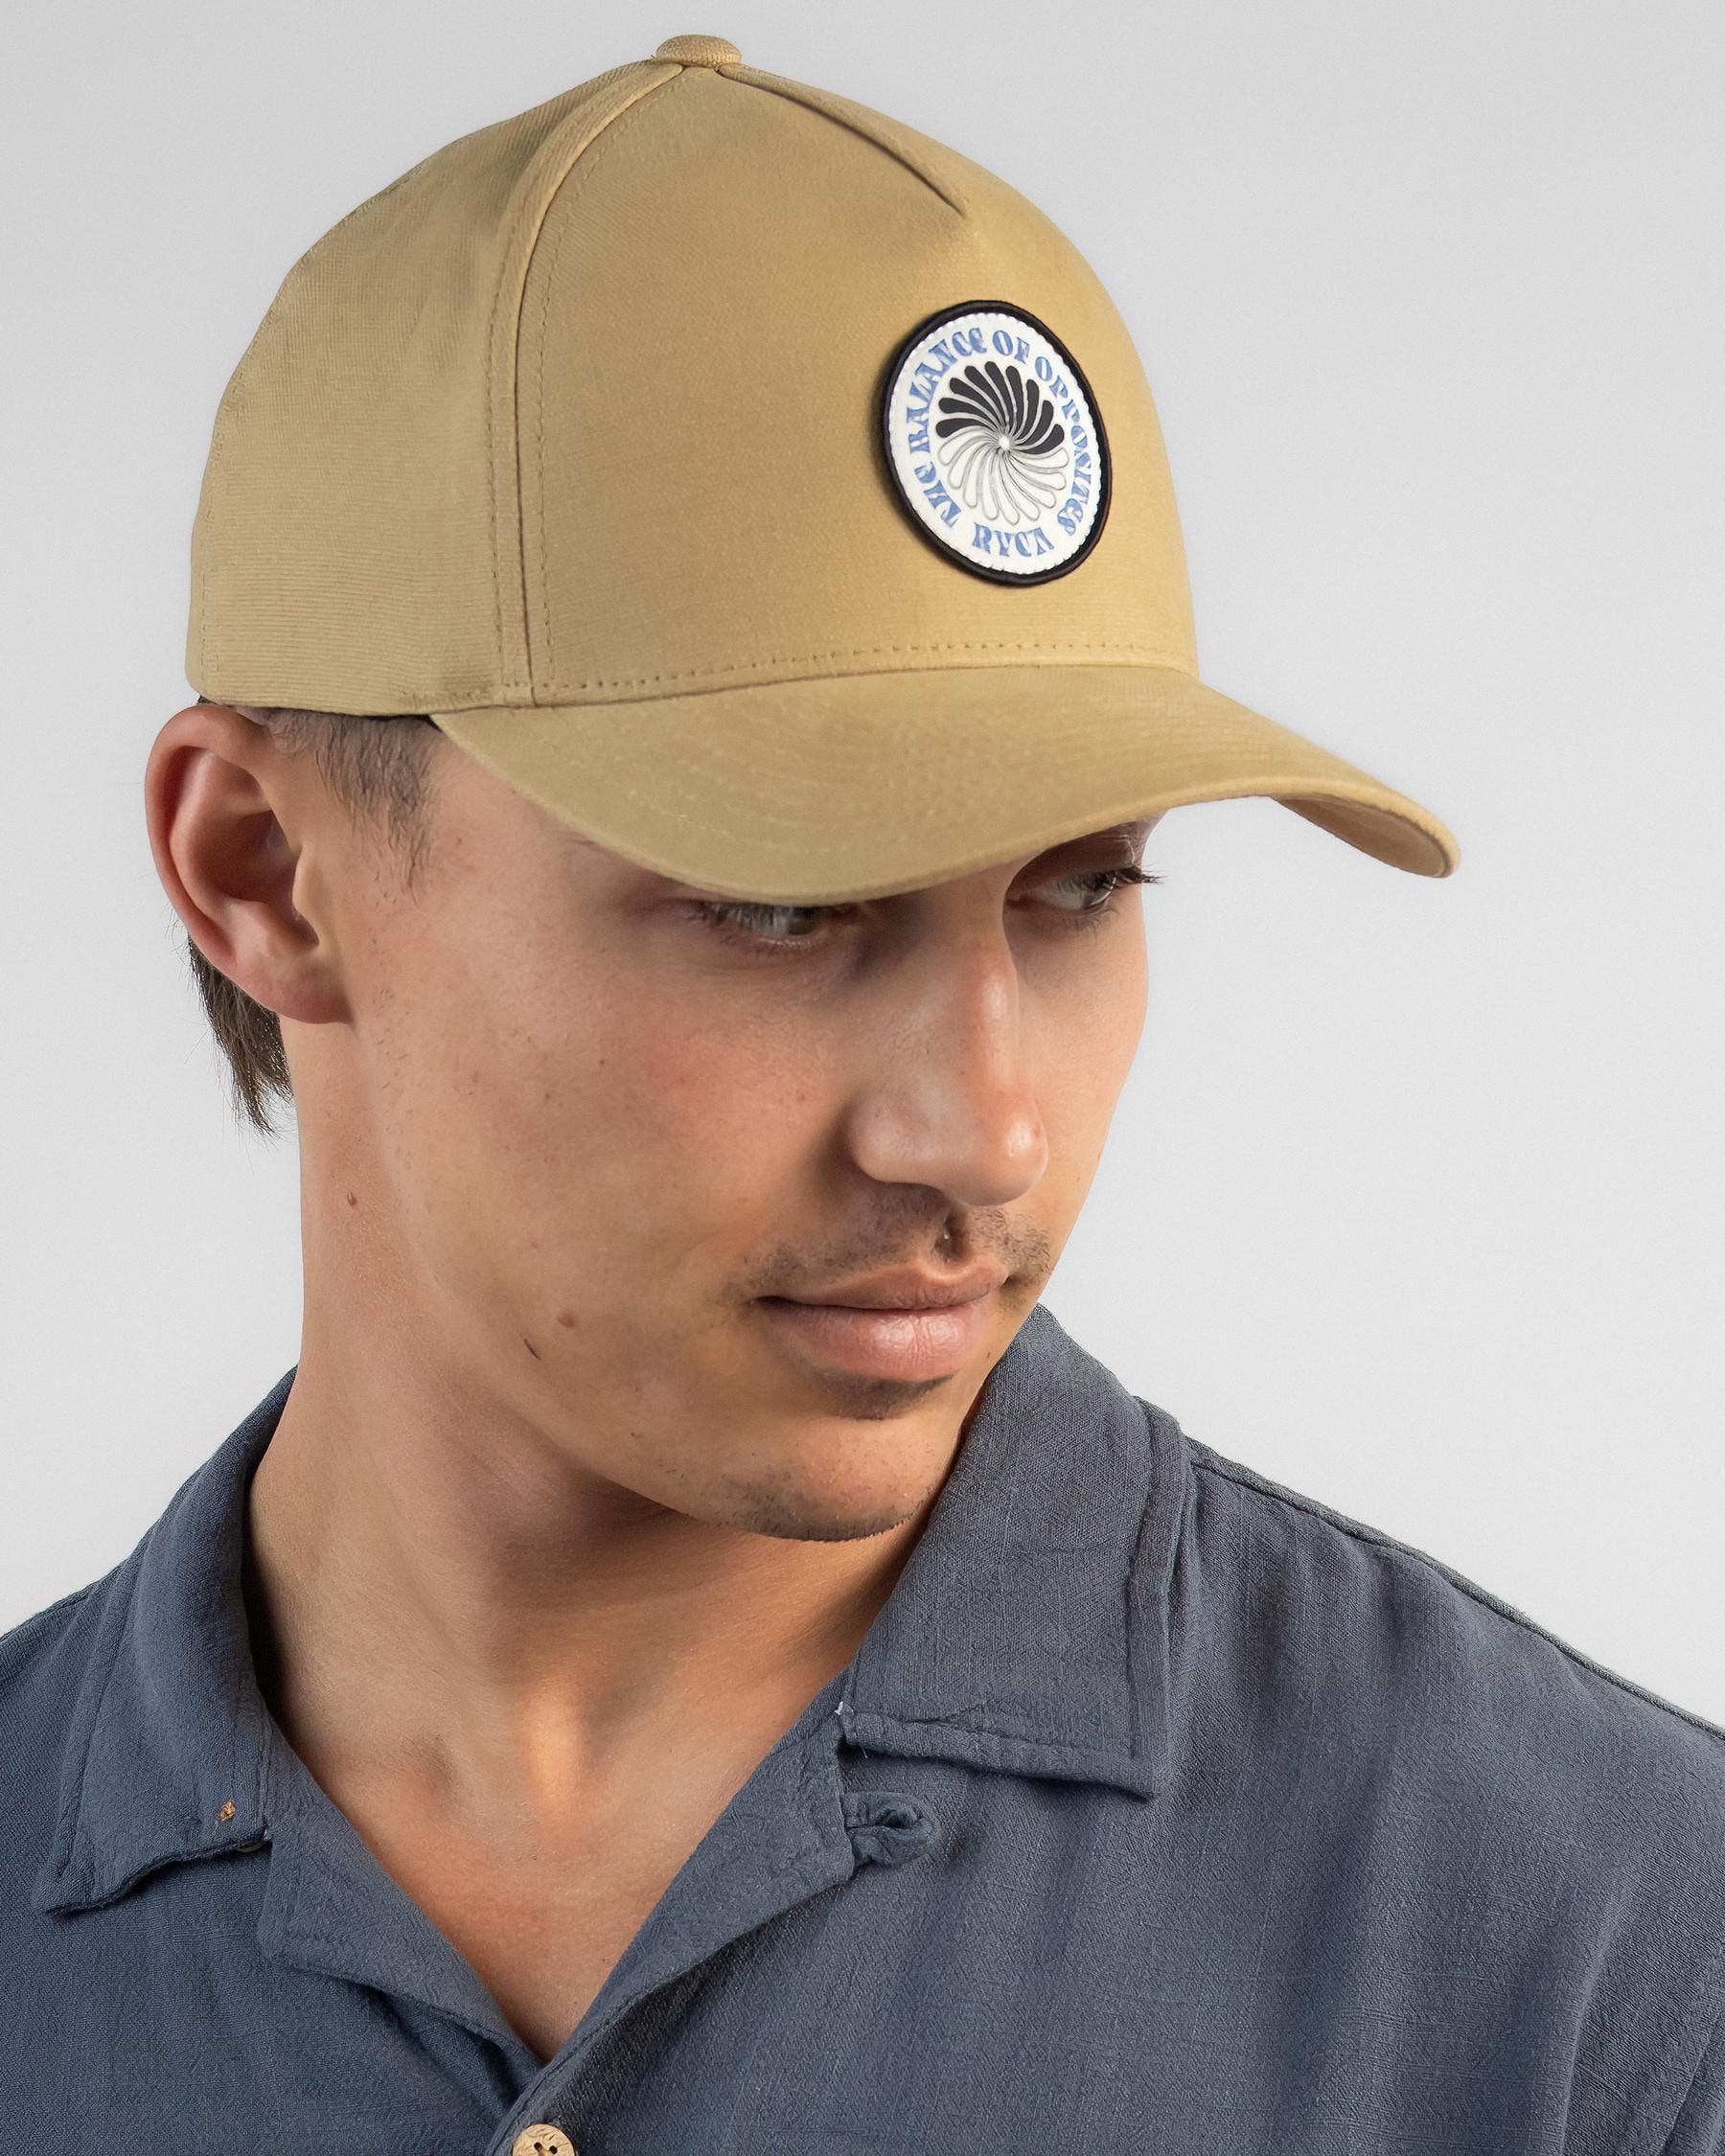 RVCA Twister Pinched Snapback Cap In Apple Cinnamon - Fast Shipping ...